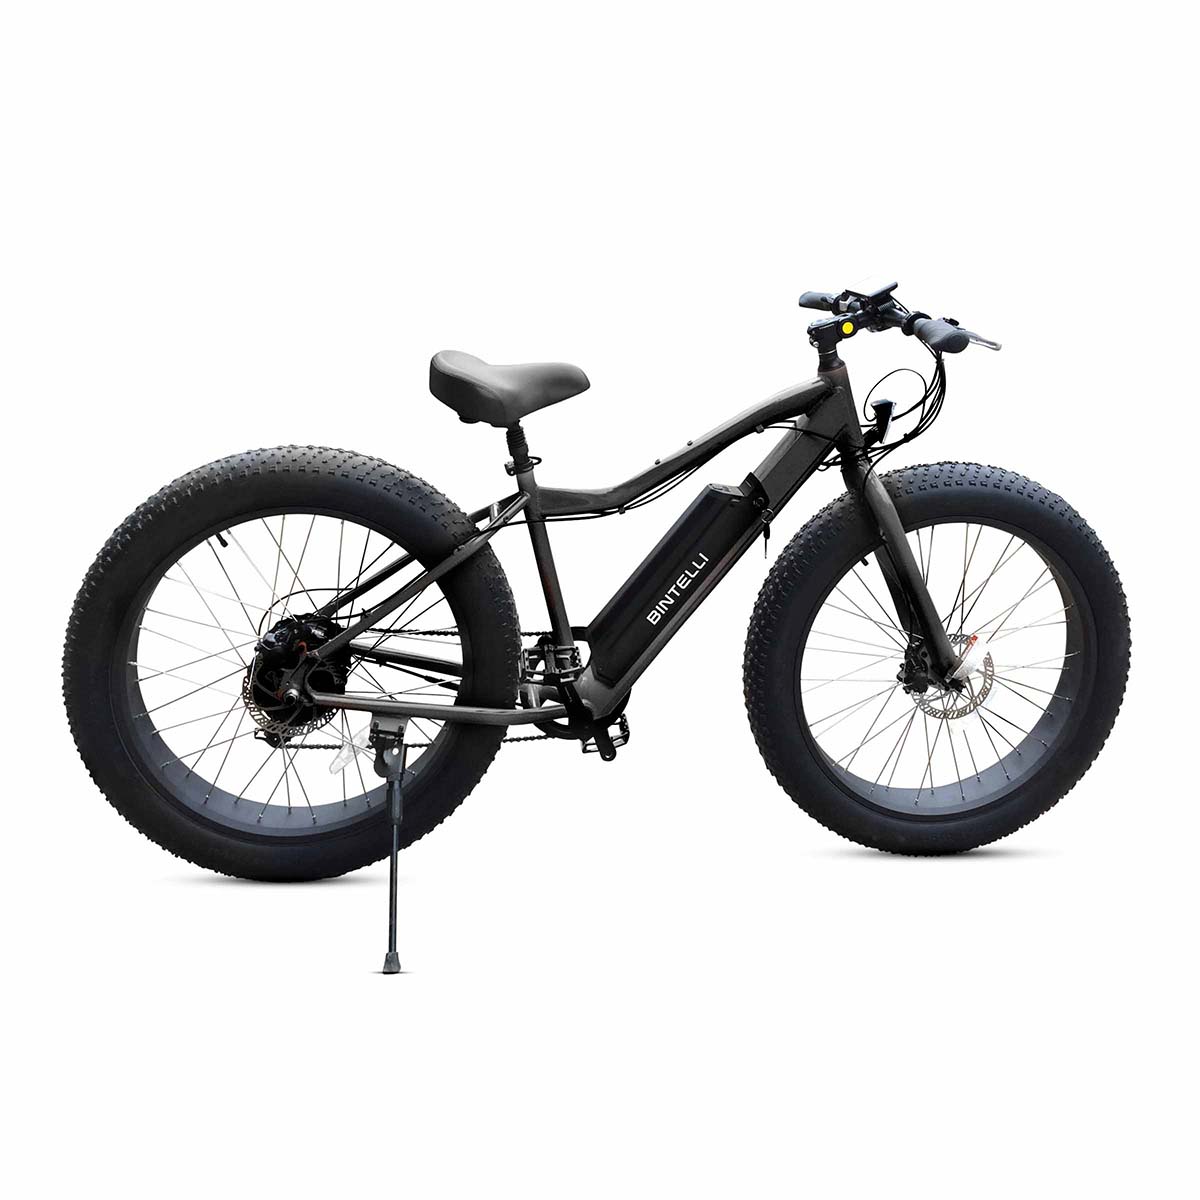 Bintelli M1 Electric Bicycle in Color Black With Fat Tire